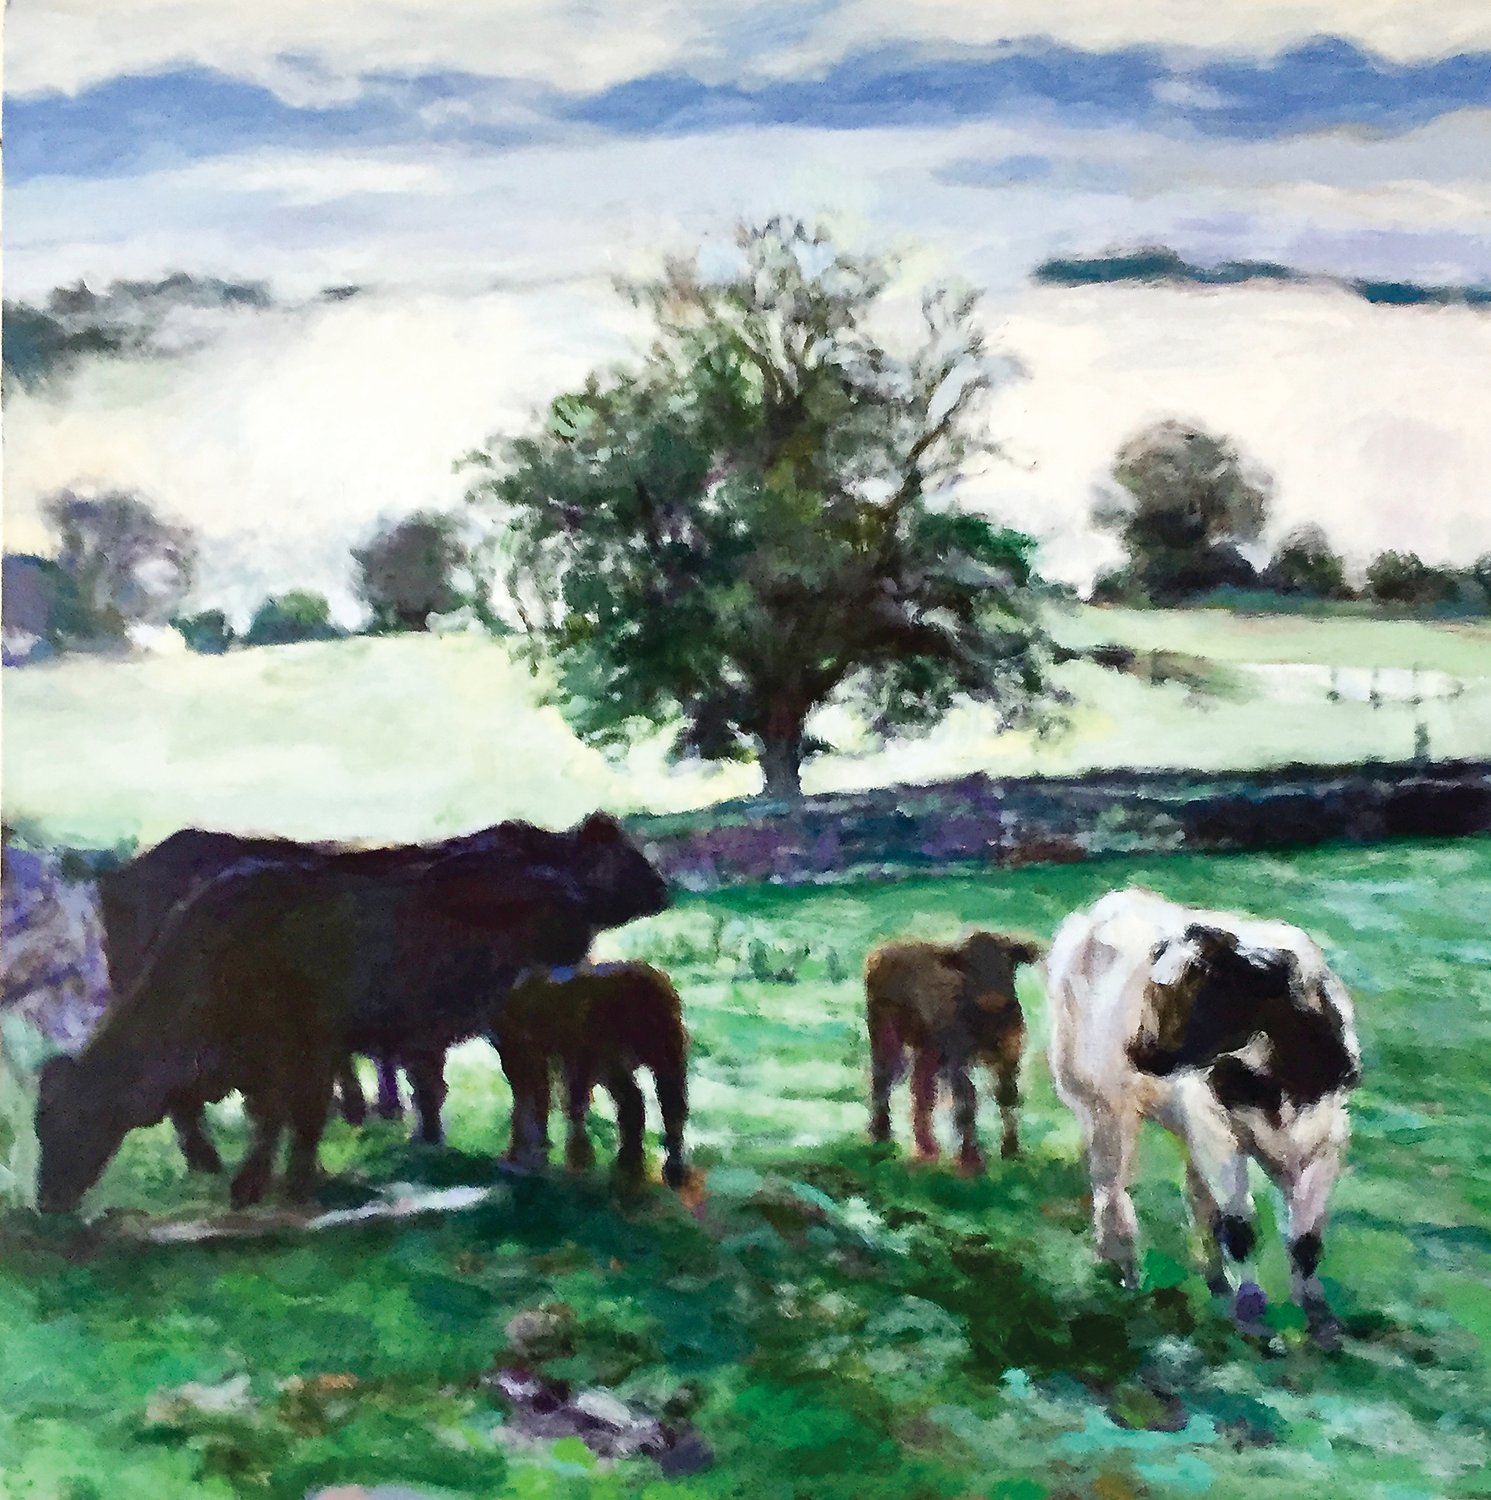 “Mist Over Esthwaite Water” is an acrylic on board by Claudia Fouse Fountaine.